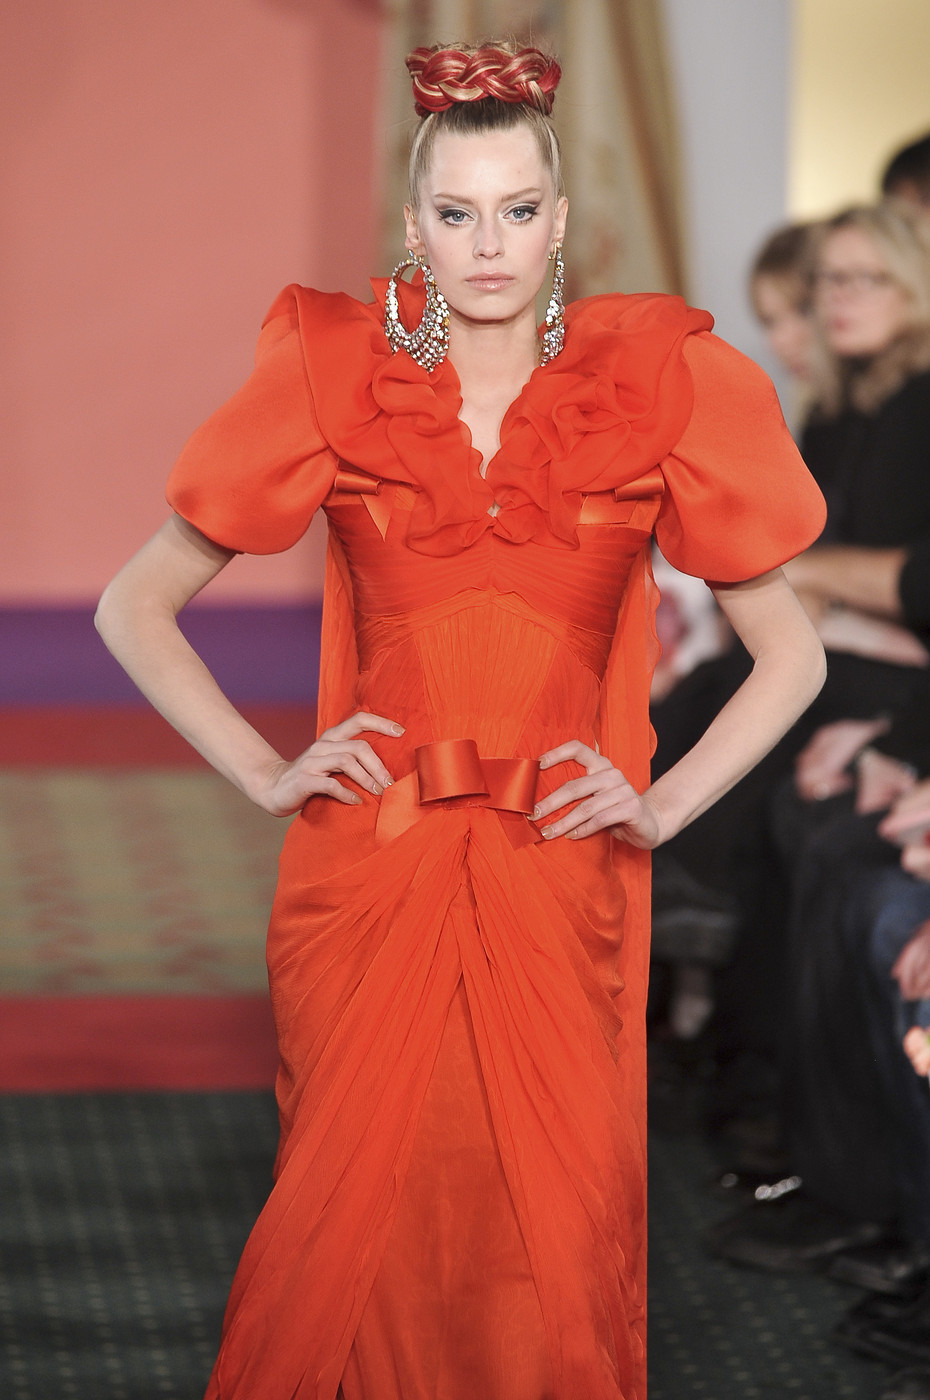 Milana Keller at Christian Lacroix Haute Couture... - Chic As F**k